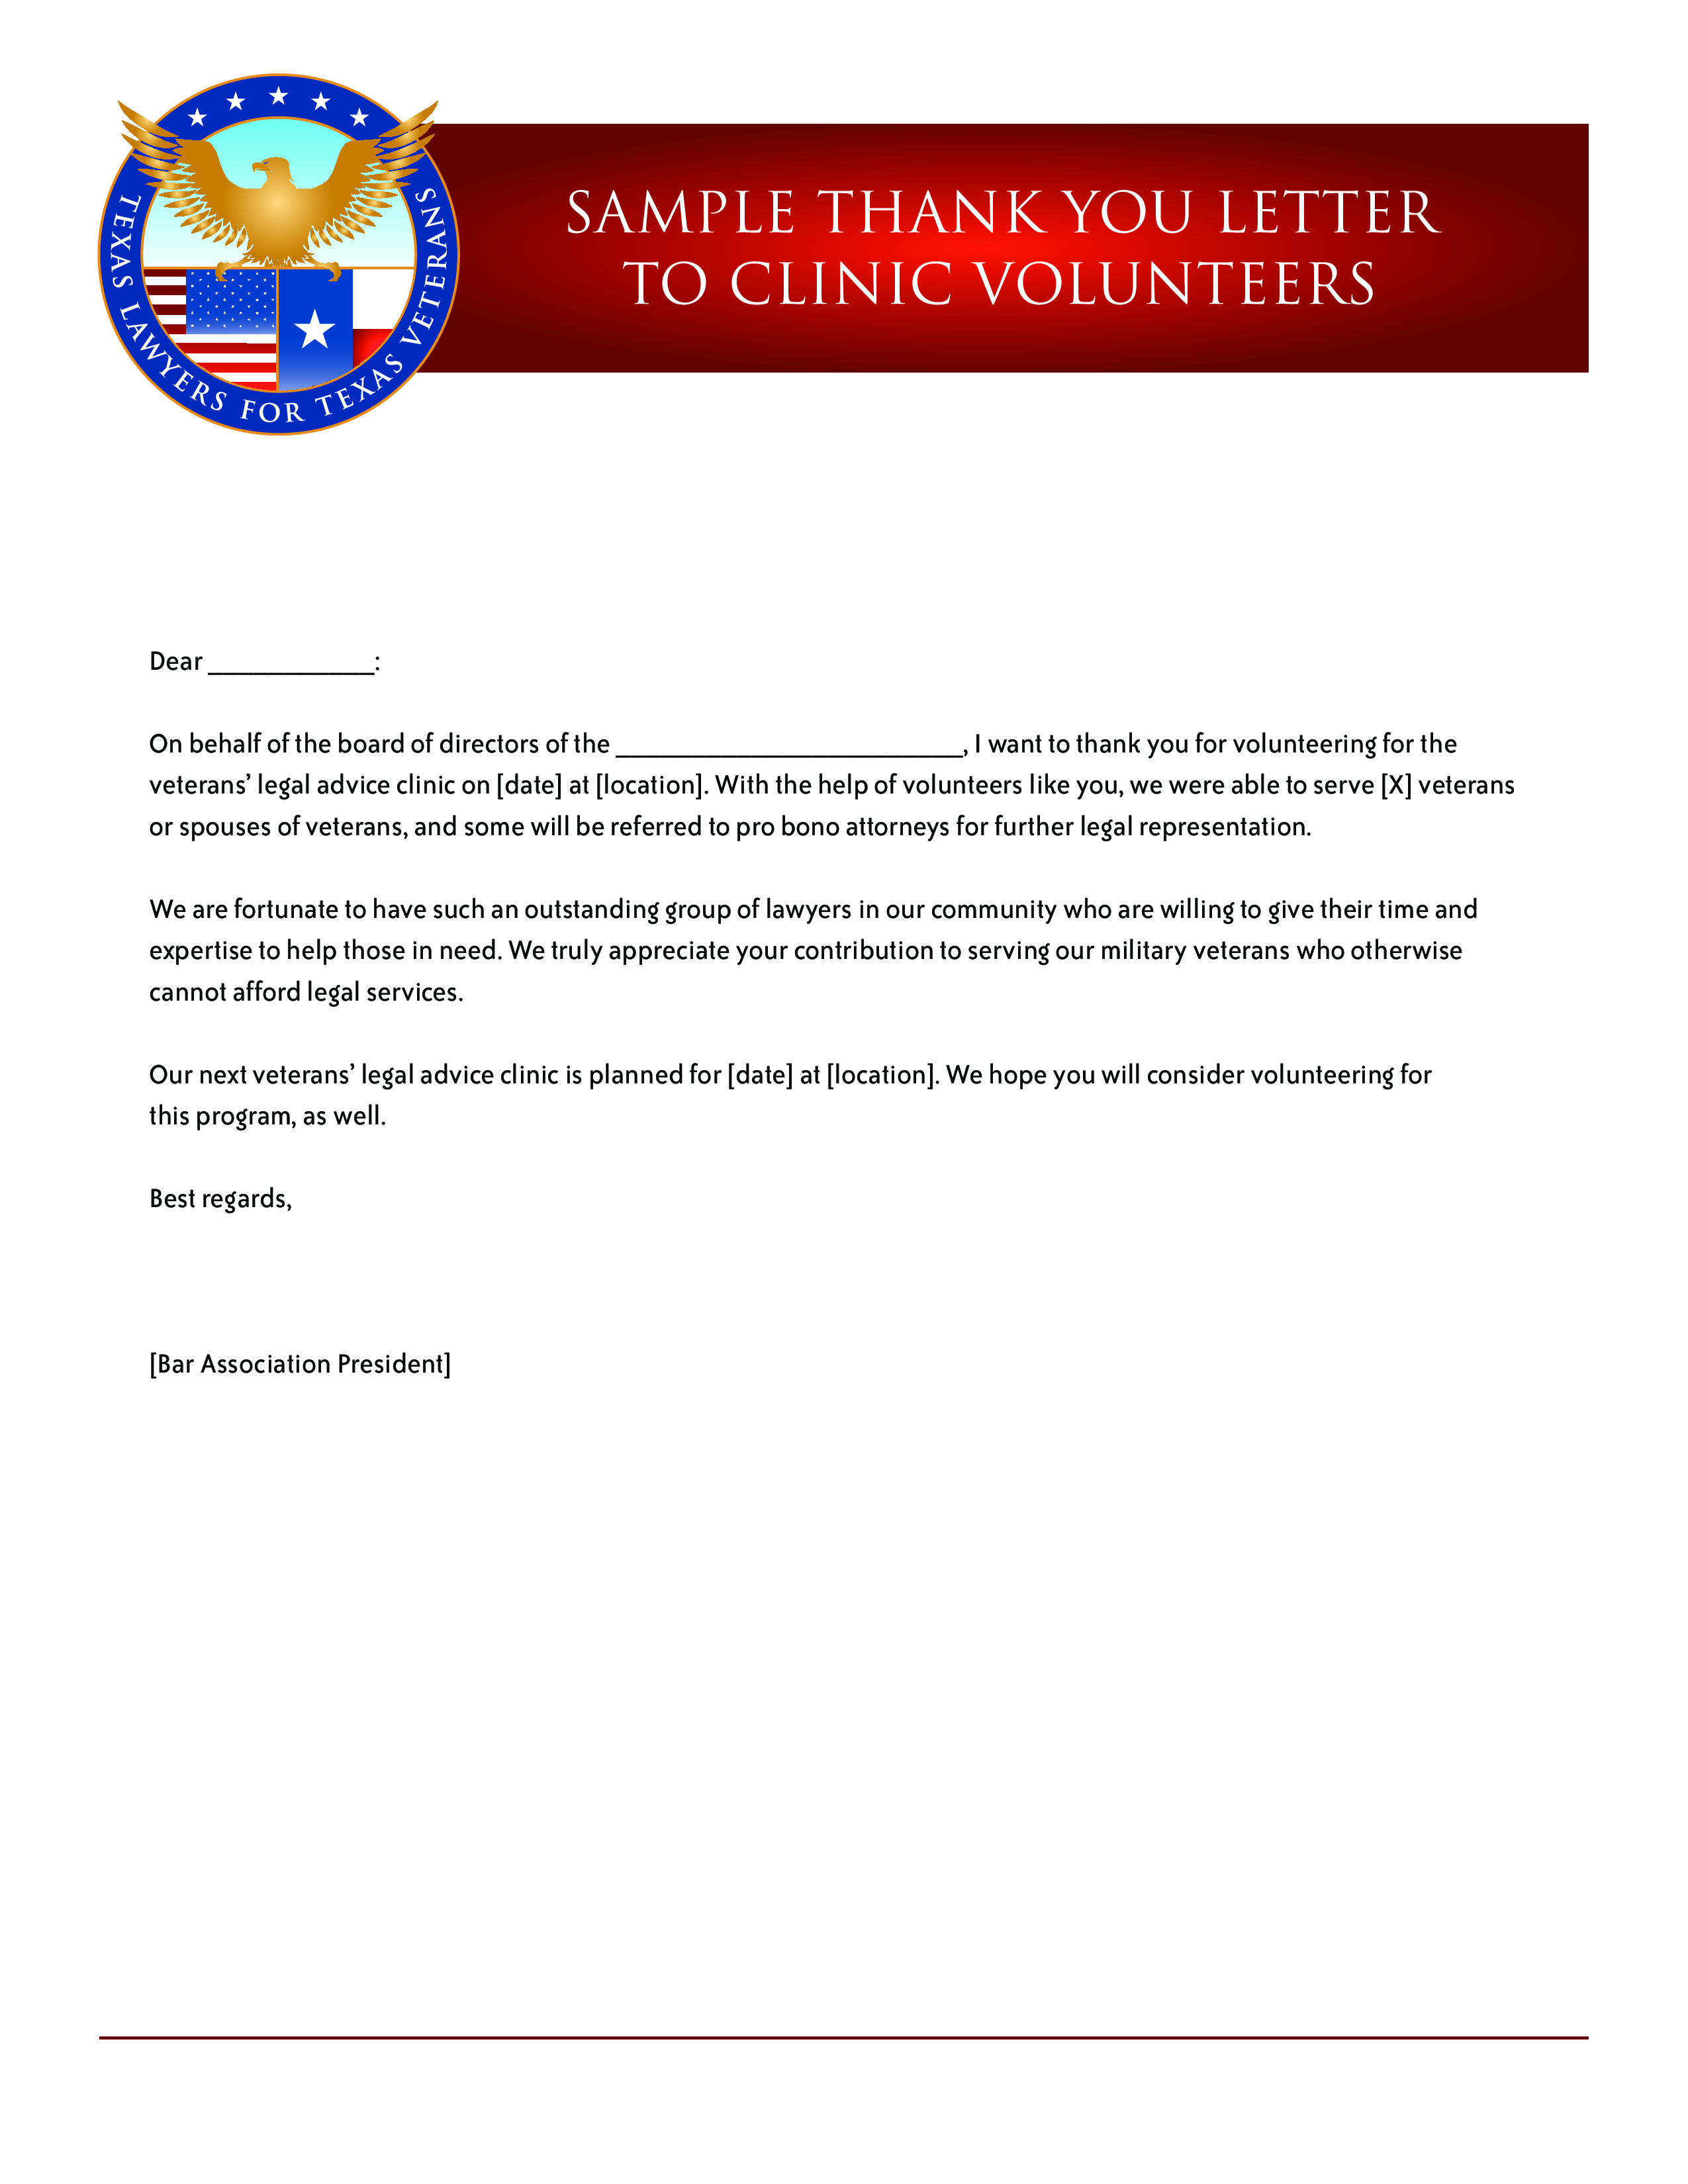 clinic-volunteer-thank-you-letter-templates-at-allbusinesstemplates